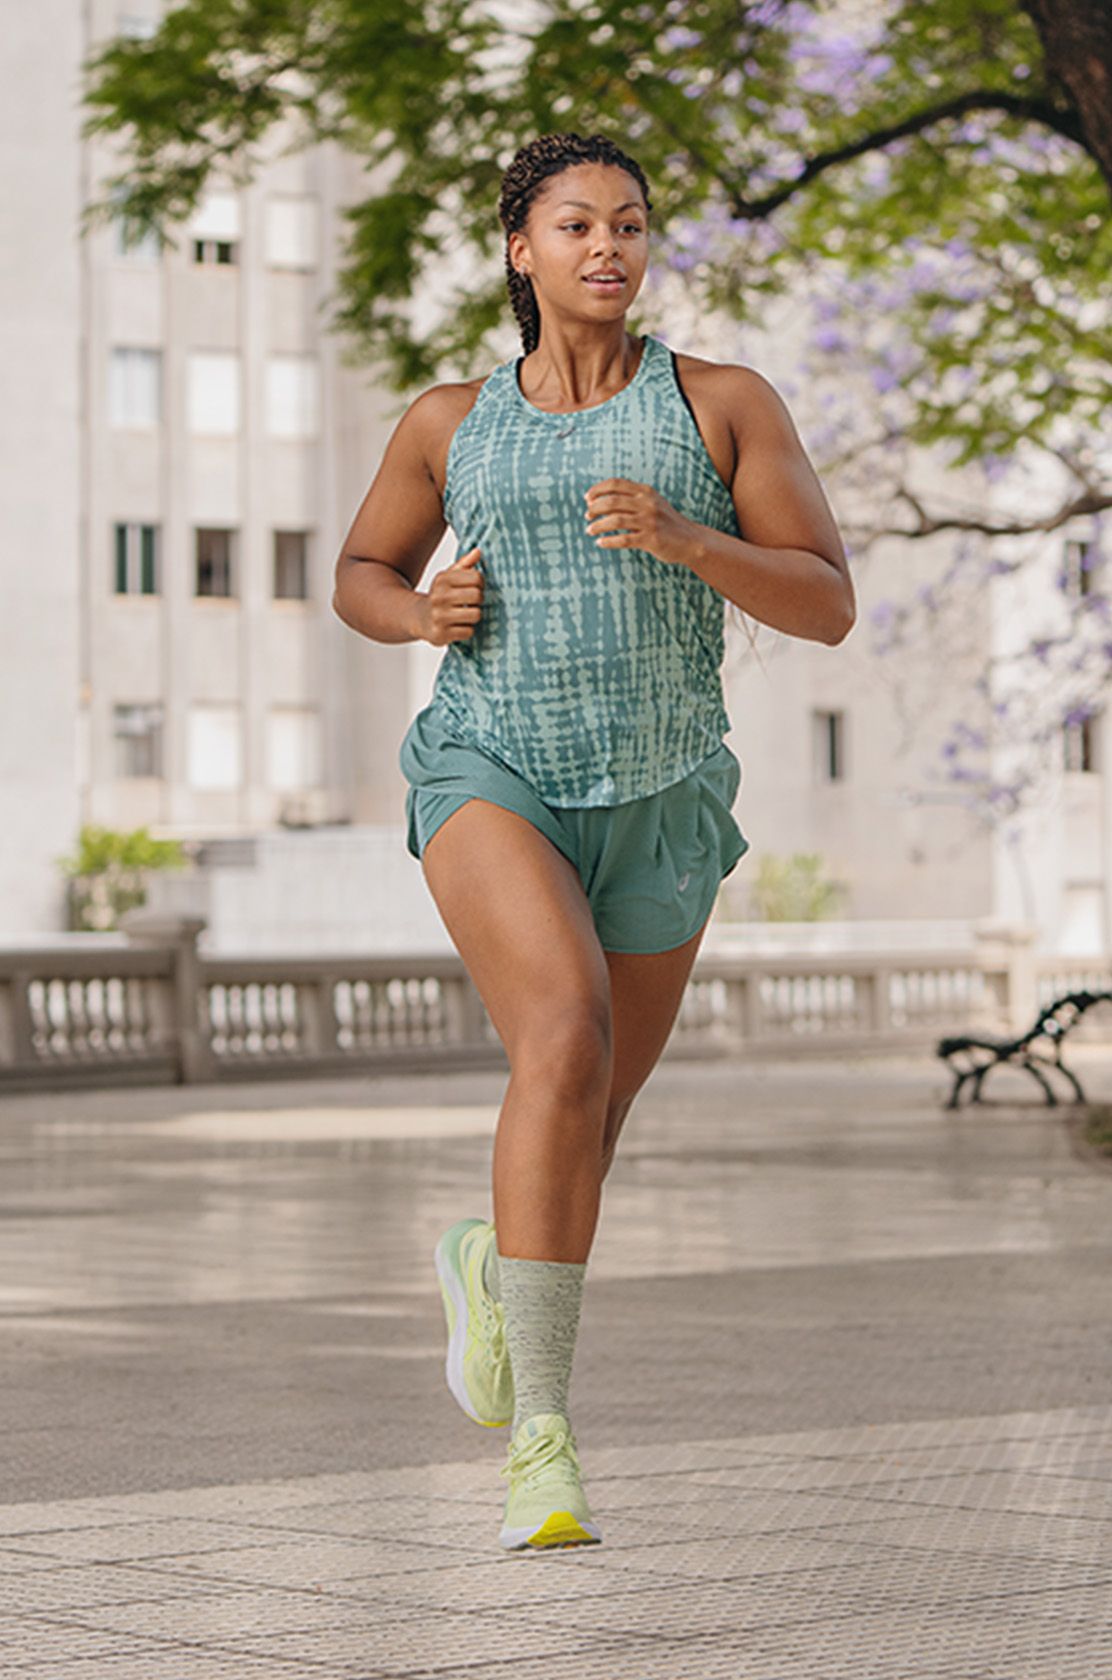 Woman in green Asics running in a city